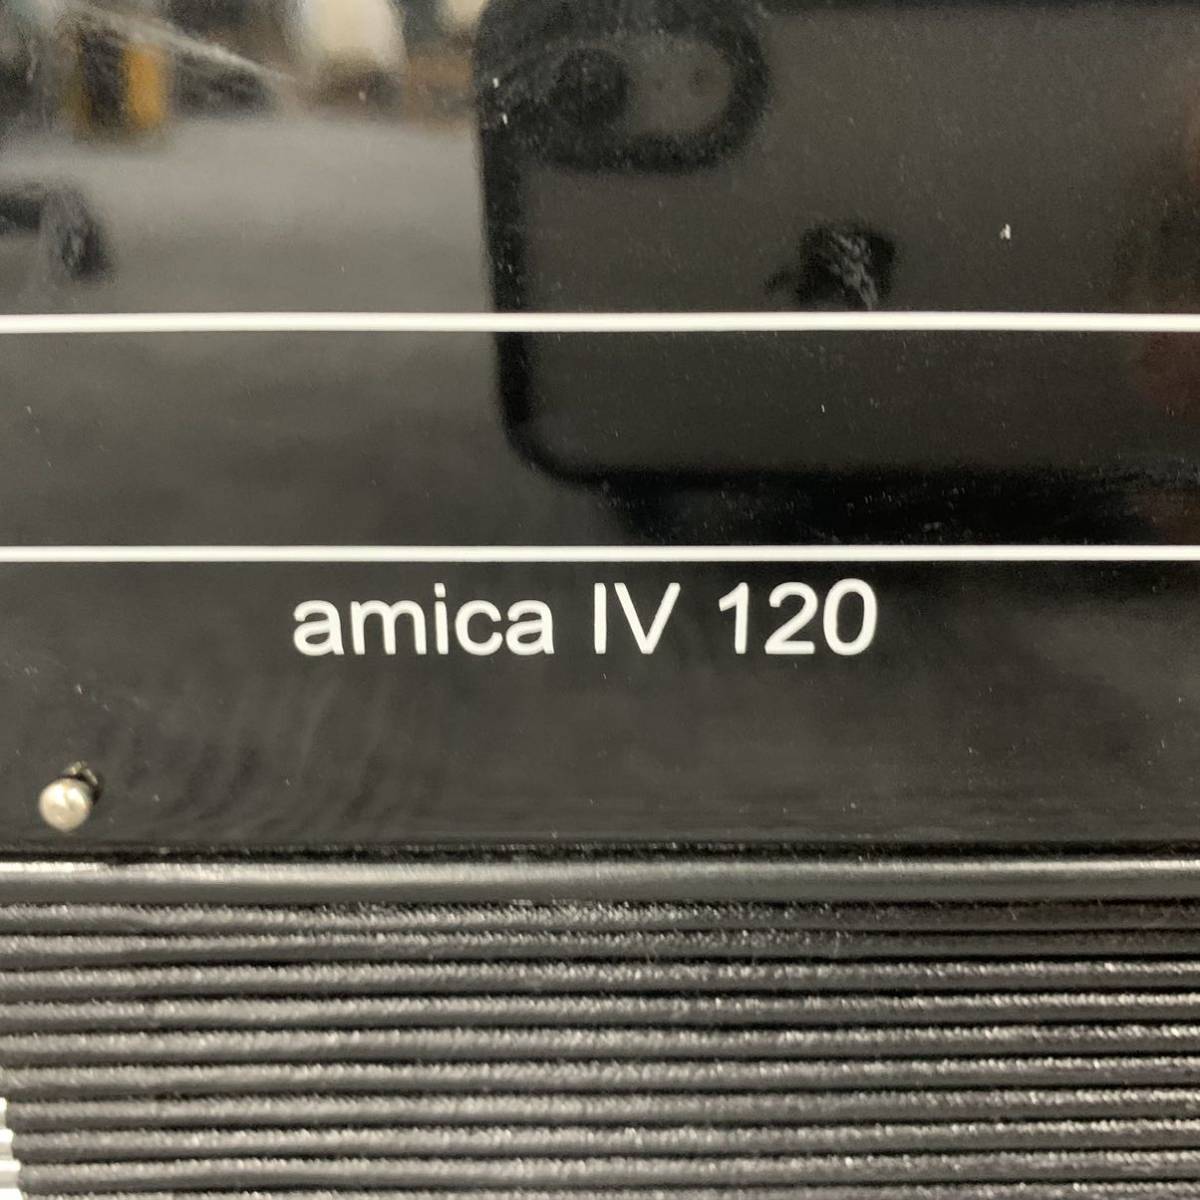 [Ib2] HOHNER amica IV 120 accordion direct pickup welcome exclusive use Carry case attaching ( wheel . with defect ) horn na-amika921-20